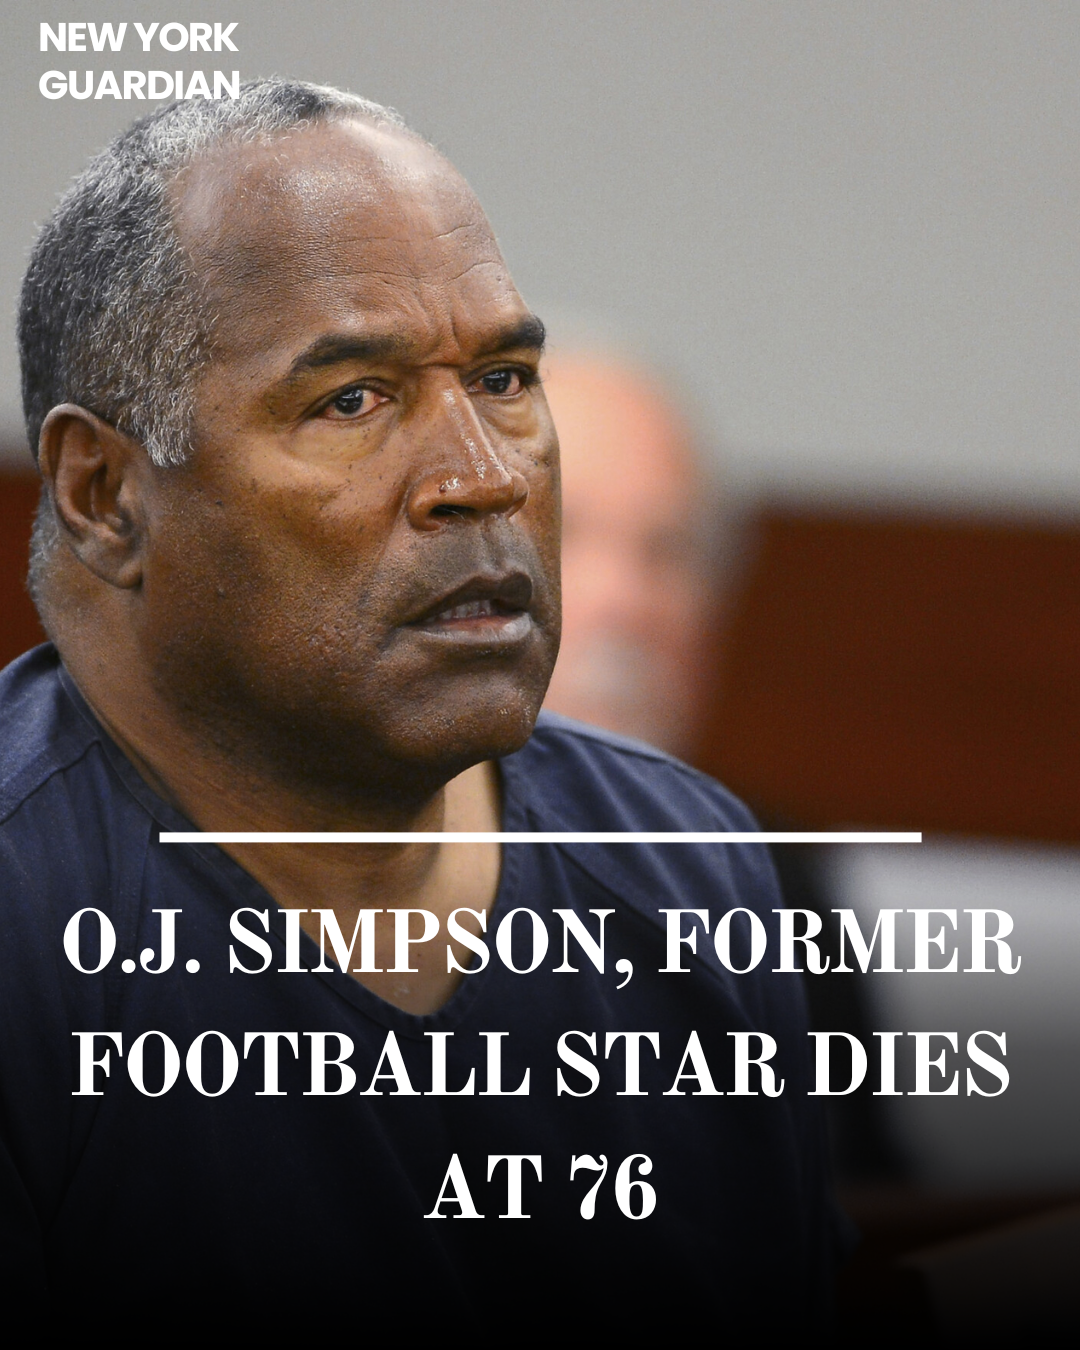 O.J. Simpson, the former football great famed for his athletic abilities, died at the age of 76 from cancer.